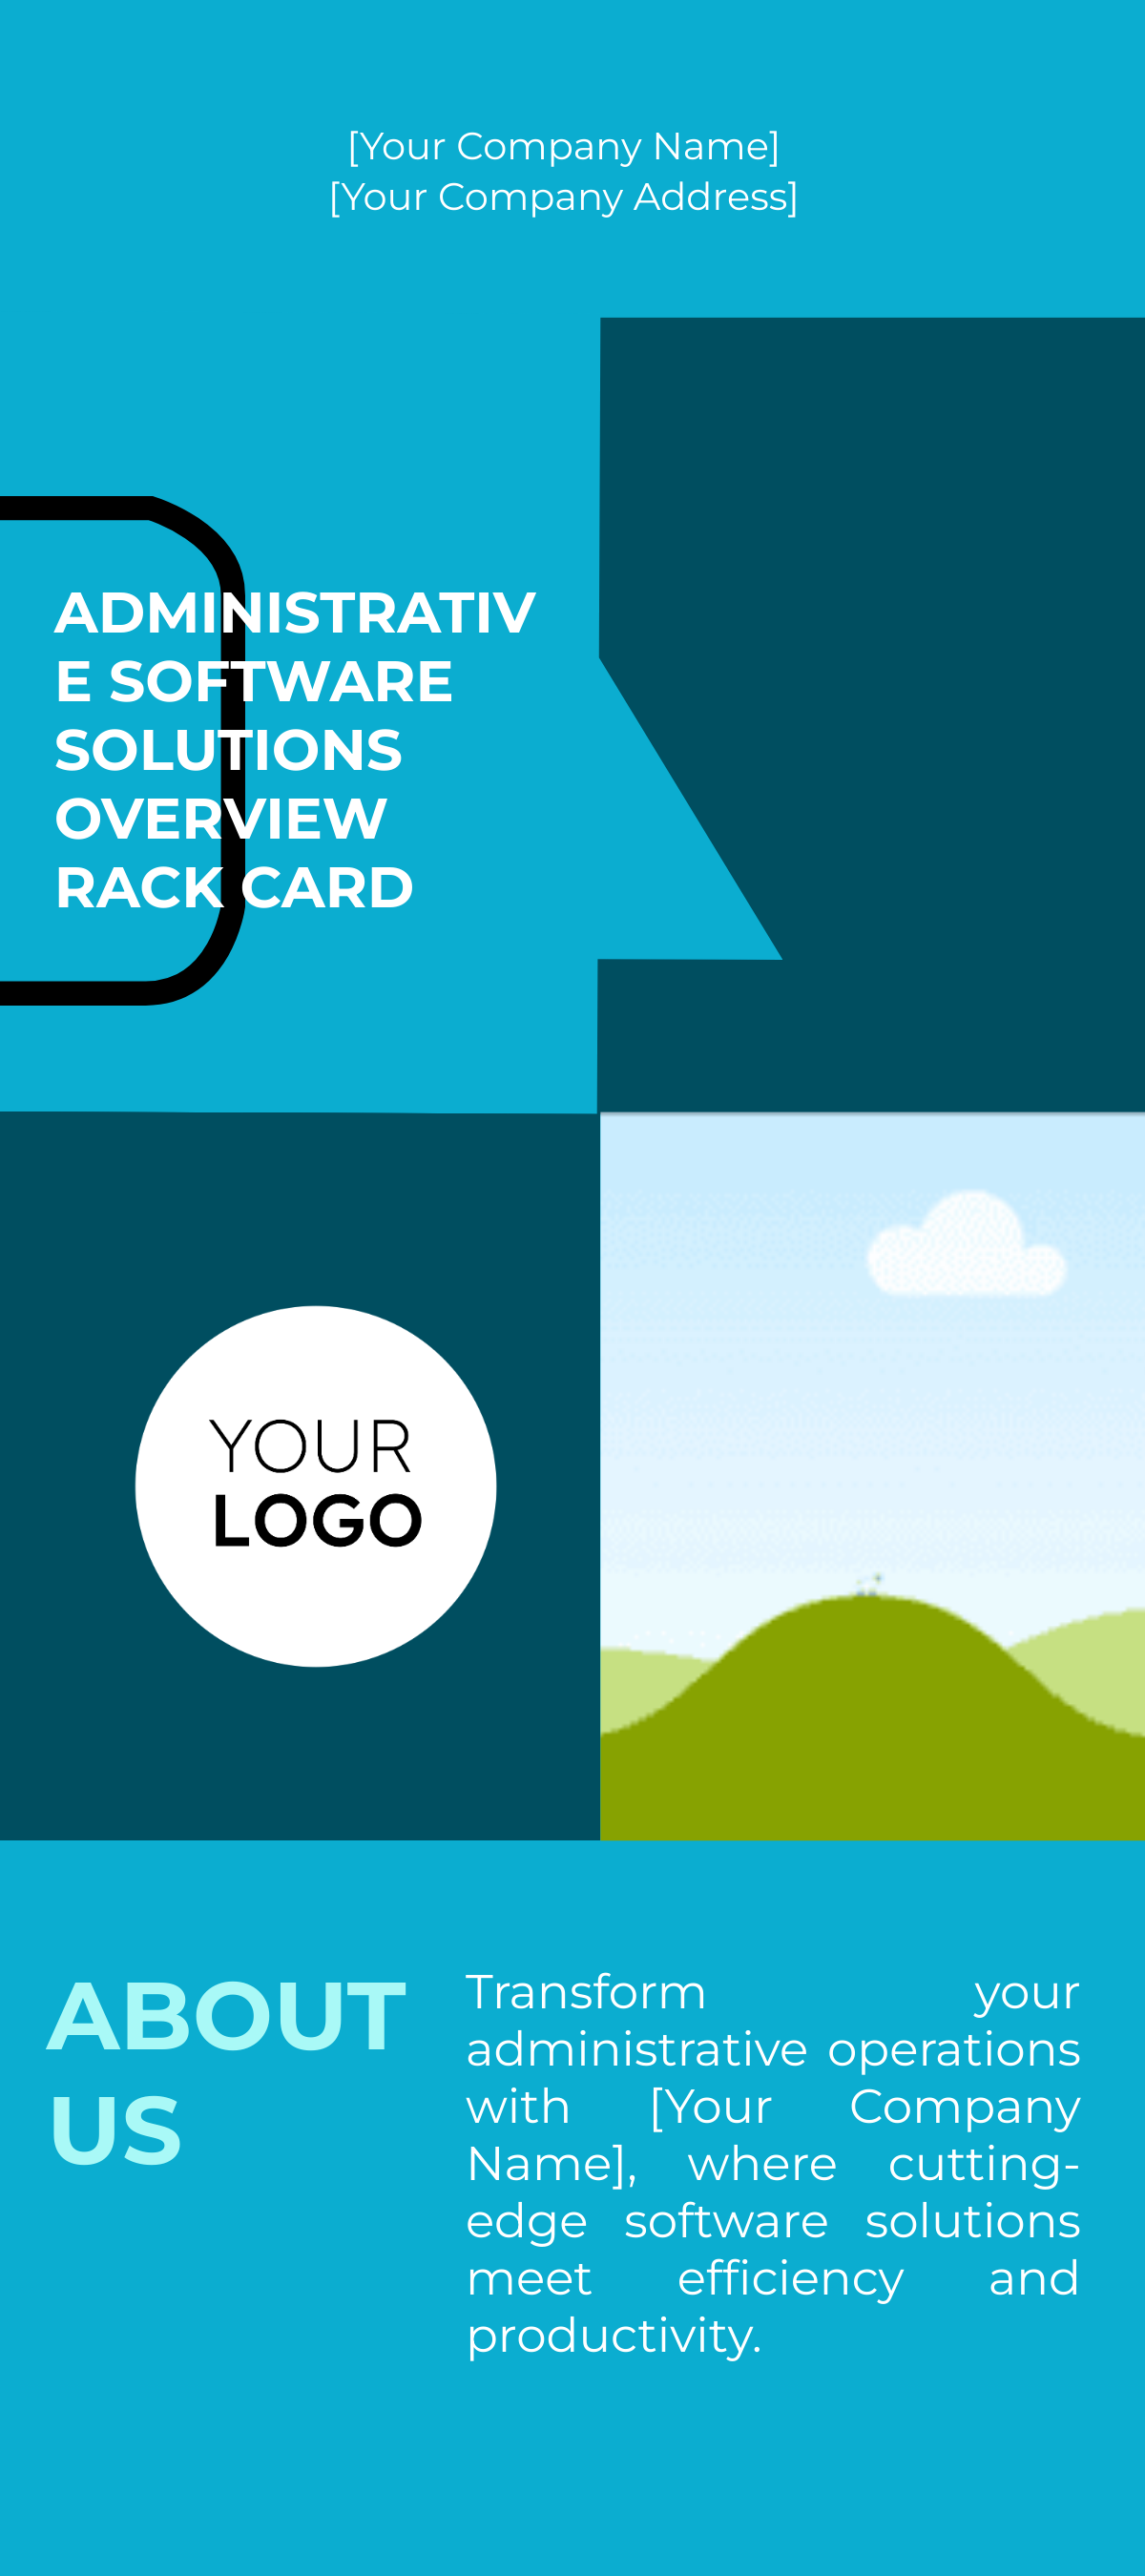 Free Administrative Software Solutions Overview Rack Card Template